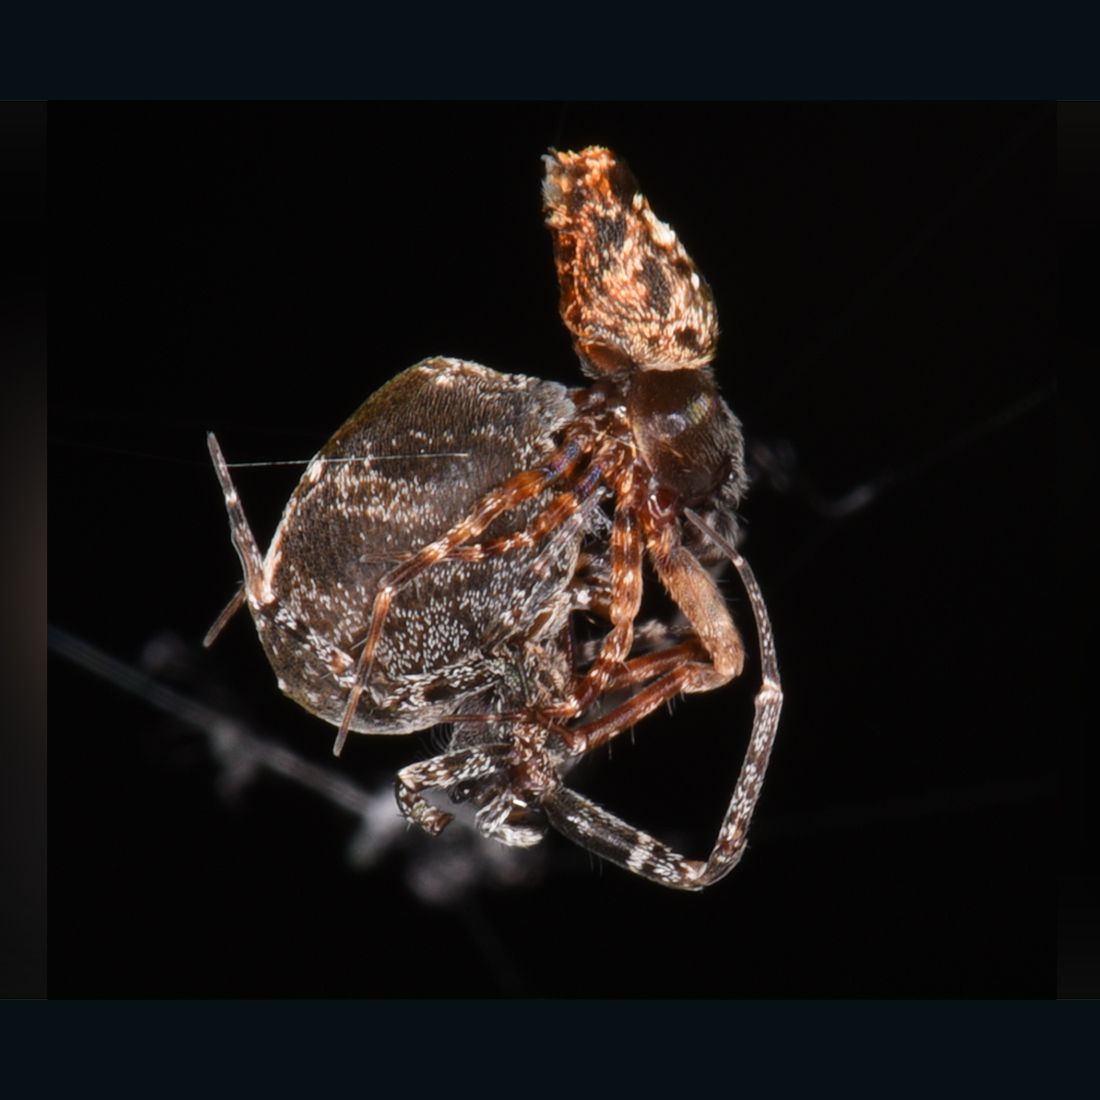 Onhandig De gasten grens Male spiders catapult away from partners to avoid sexual cannibalism | CNN